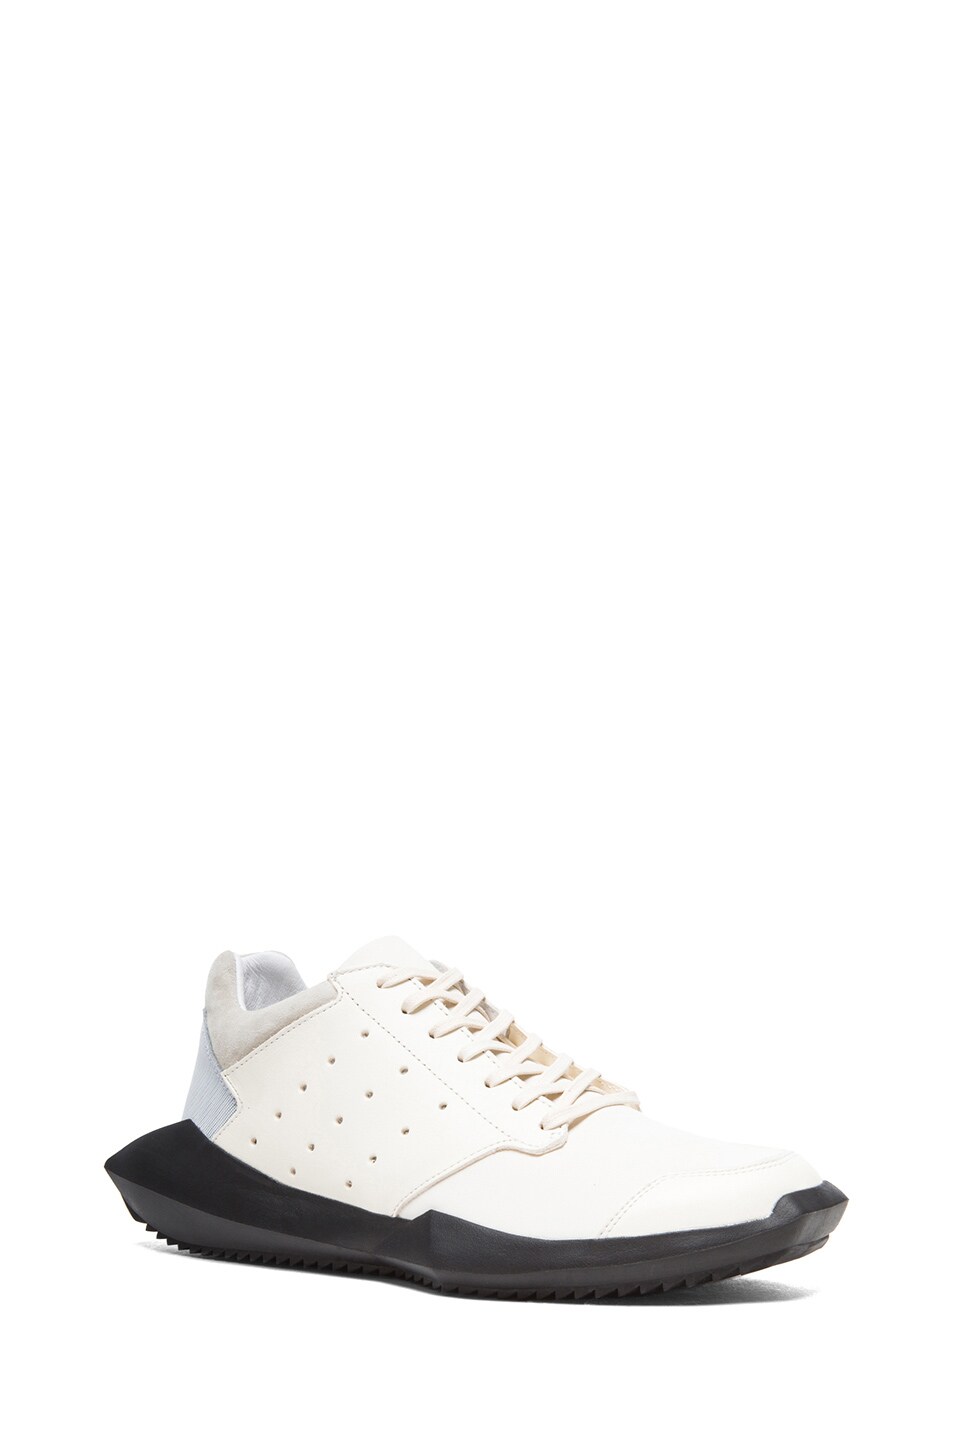 Image 1 of Rick Owens x Adidas Leather Trainers in White & Black